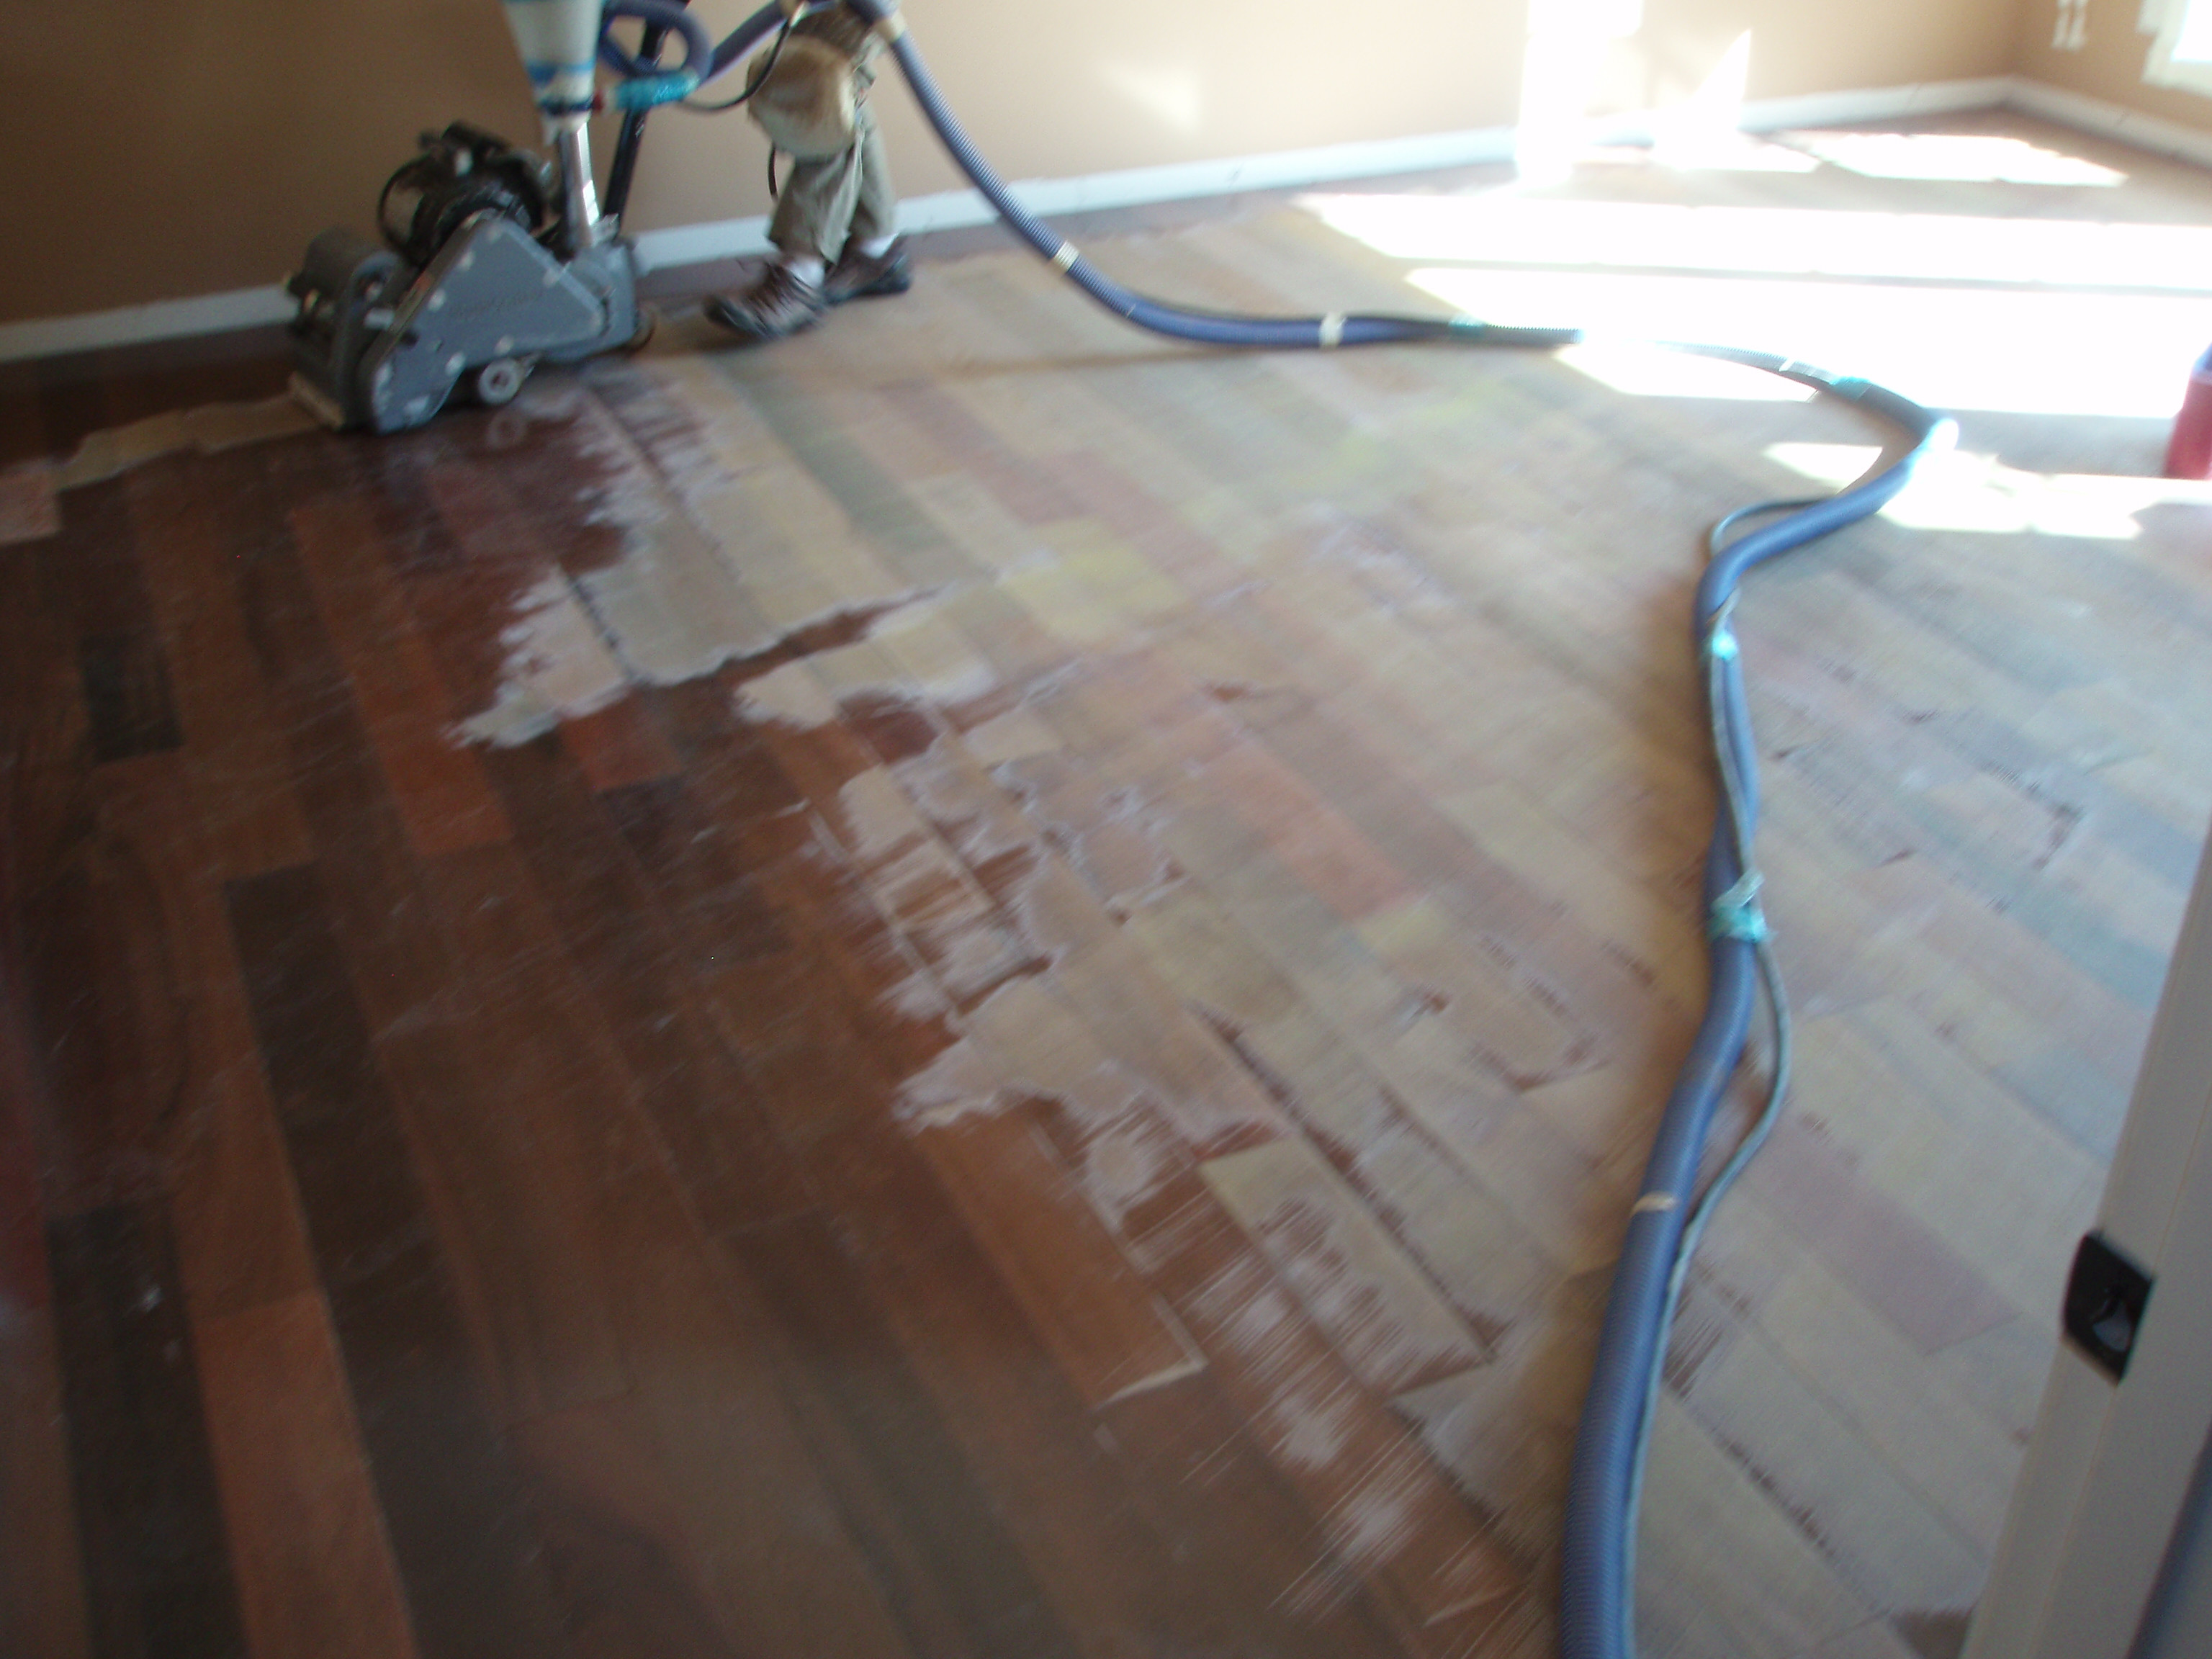 25 Spectacular How to Put Down Hardwood Floors Video 2024 free download how to put down hardwood floors video of can you refinish bamboo floors floor pertaining to can you refinish bamboo floors will refinishingod floors pet stains old without sanding wood with